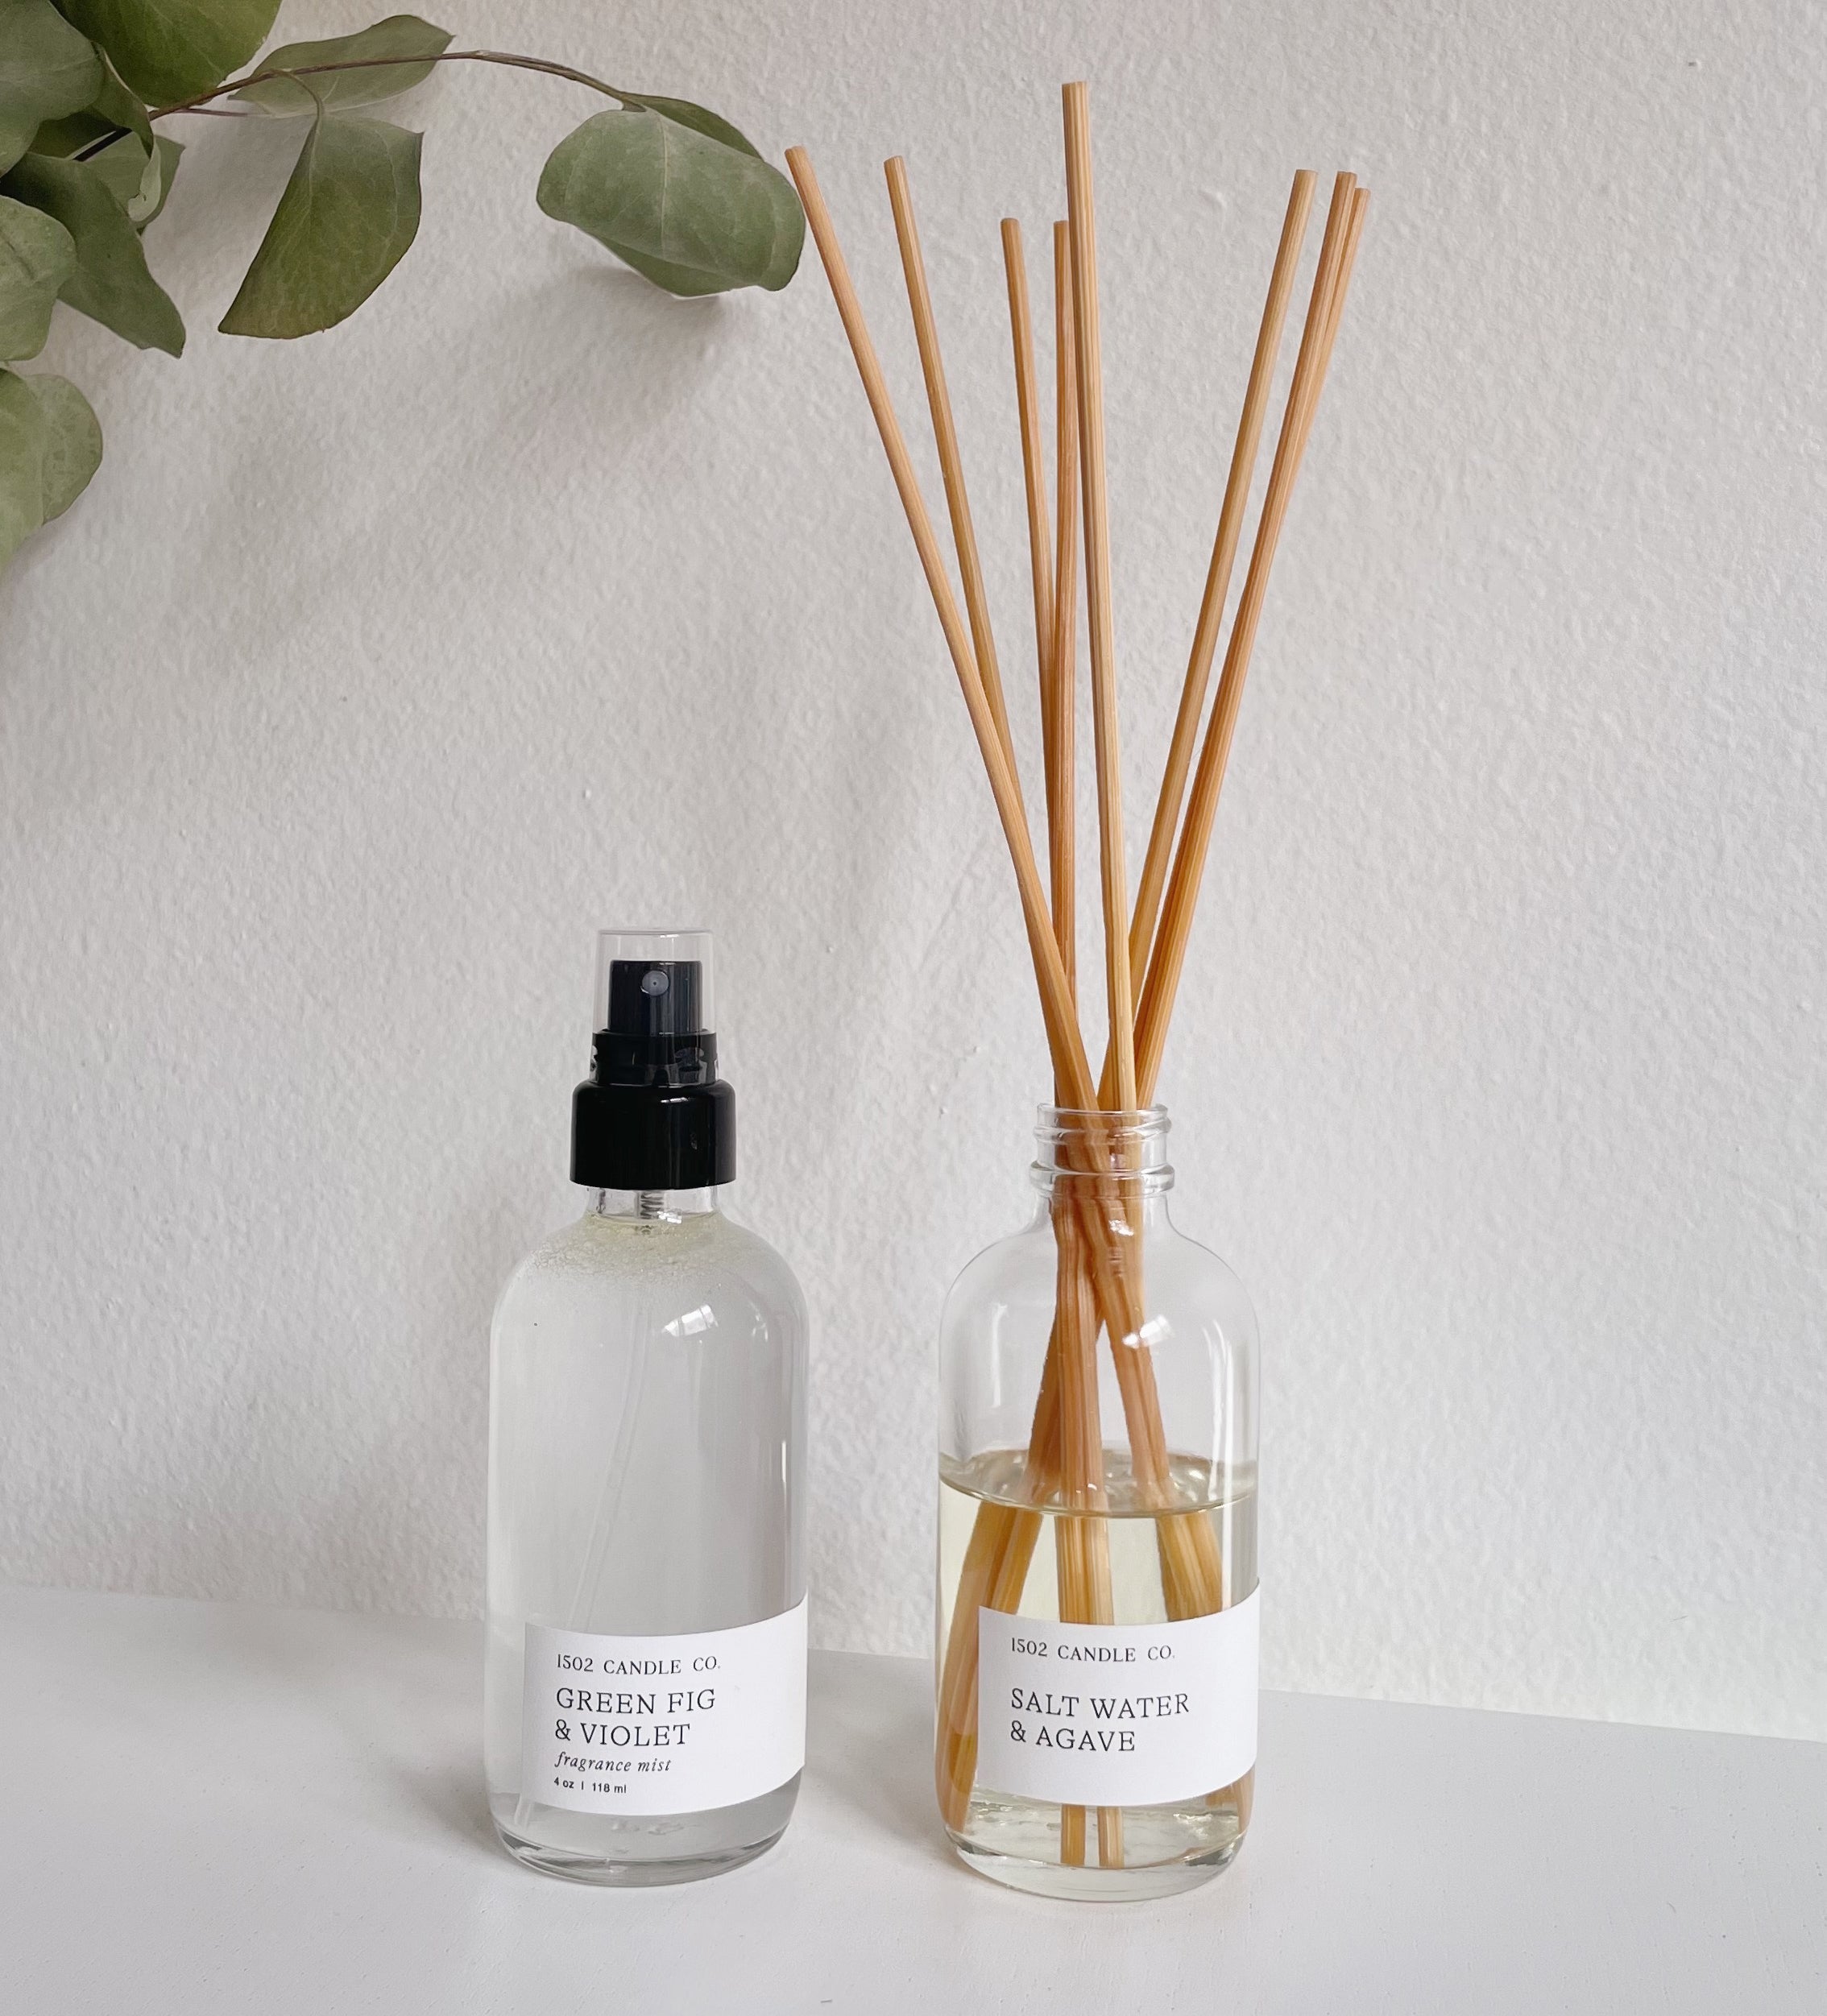 Which is better, mists or diffusers?